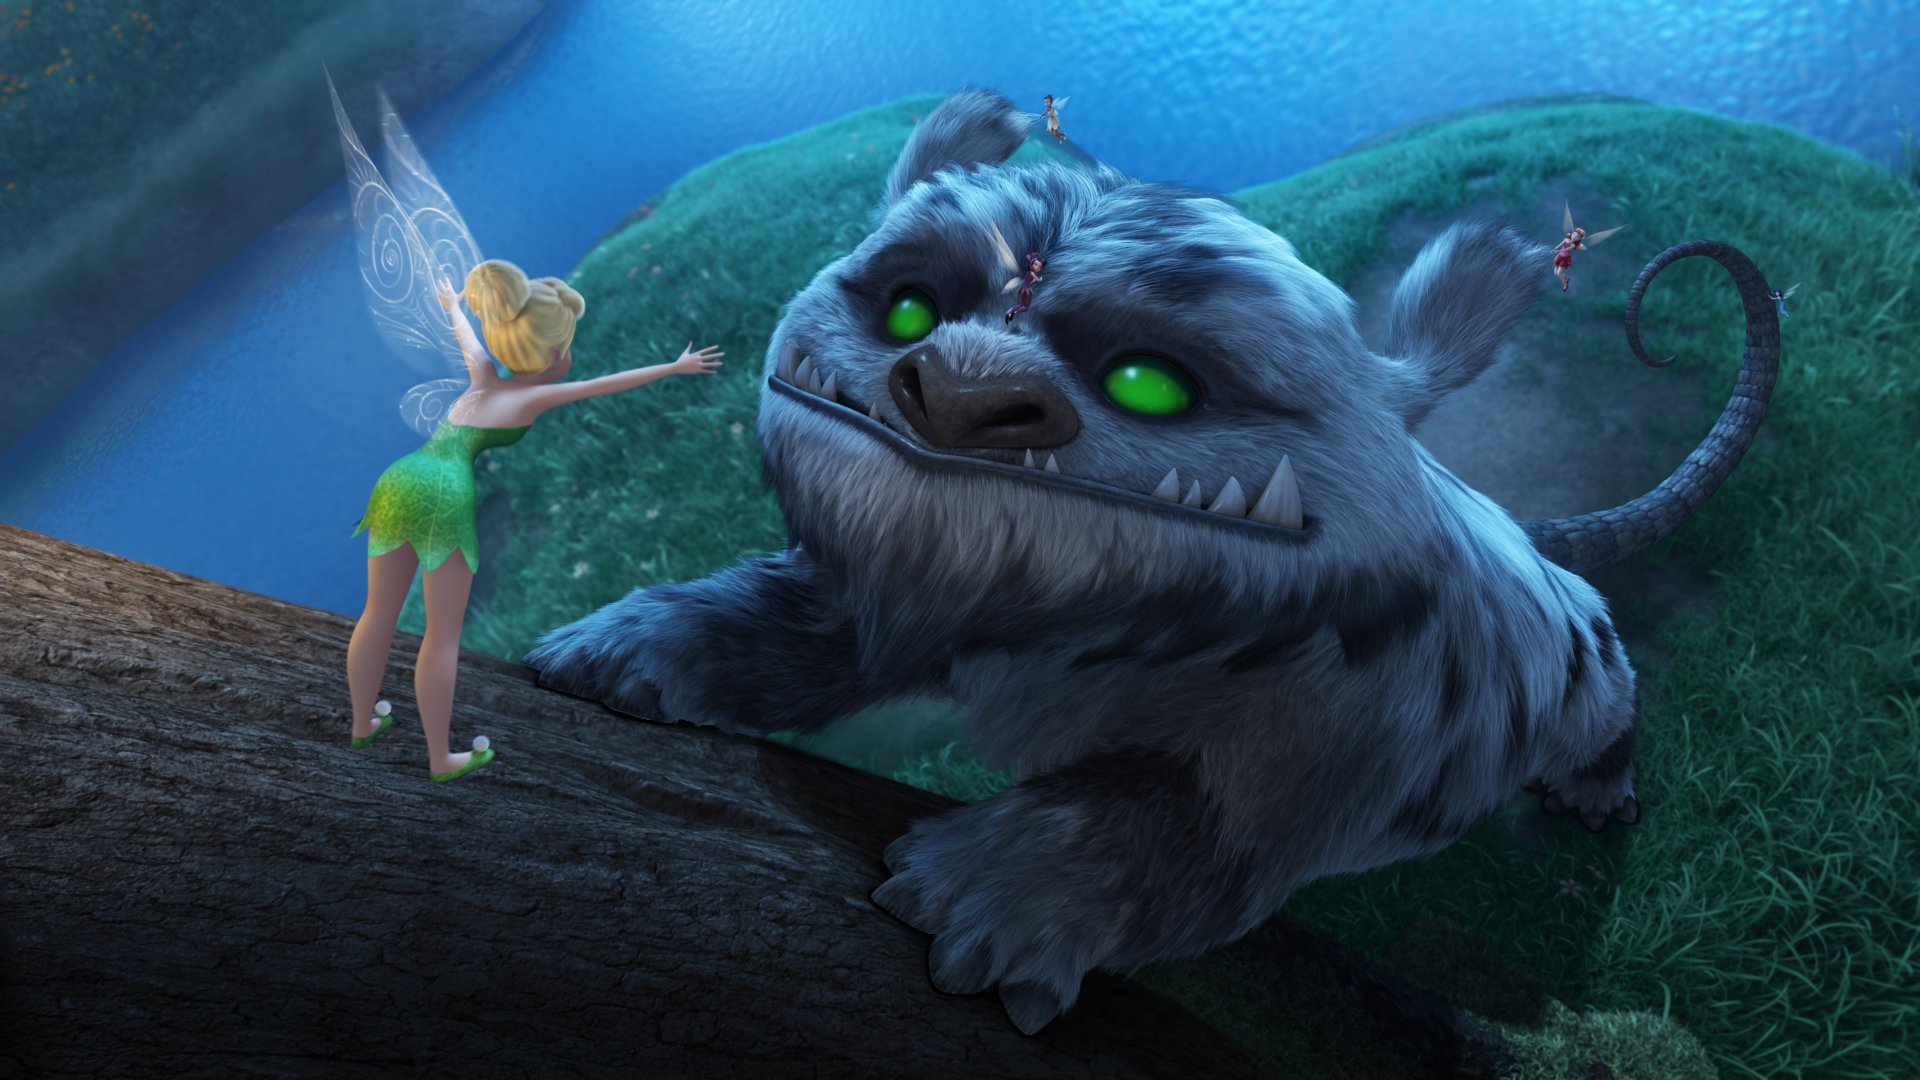 2014 Tinker Bell And The Legend Of The NeverBeast